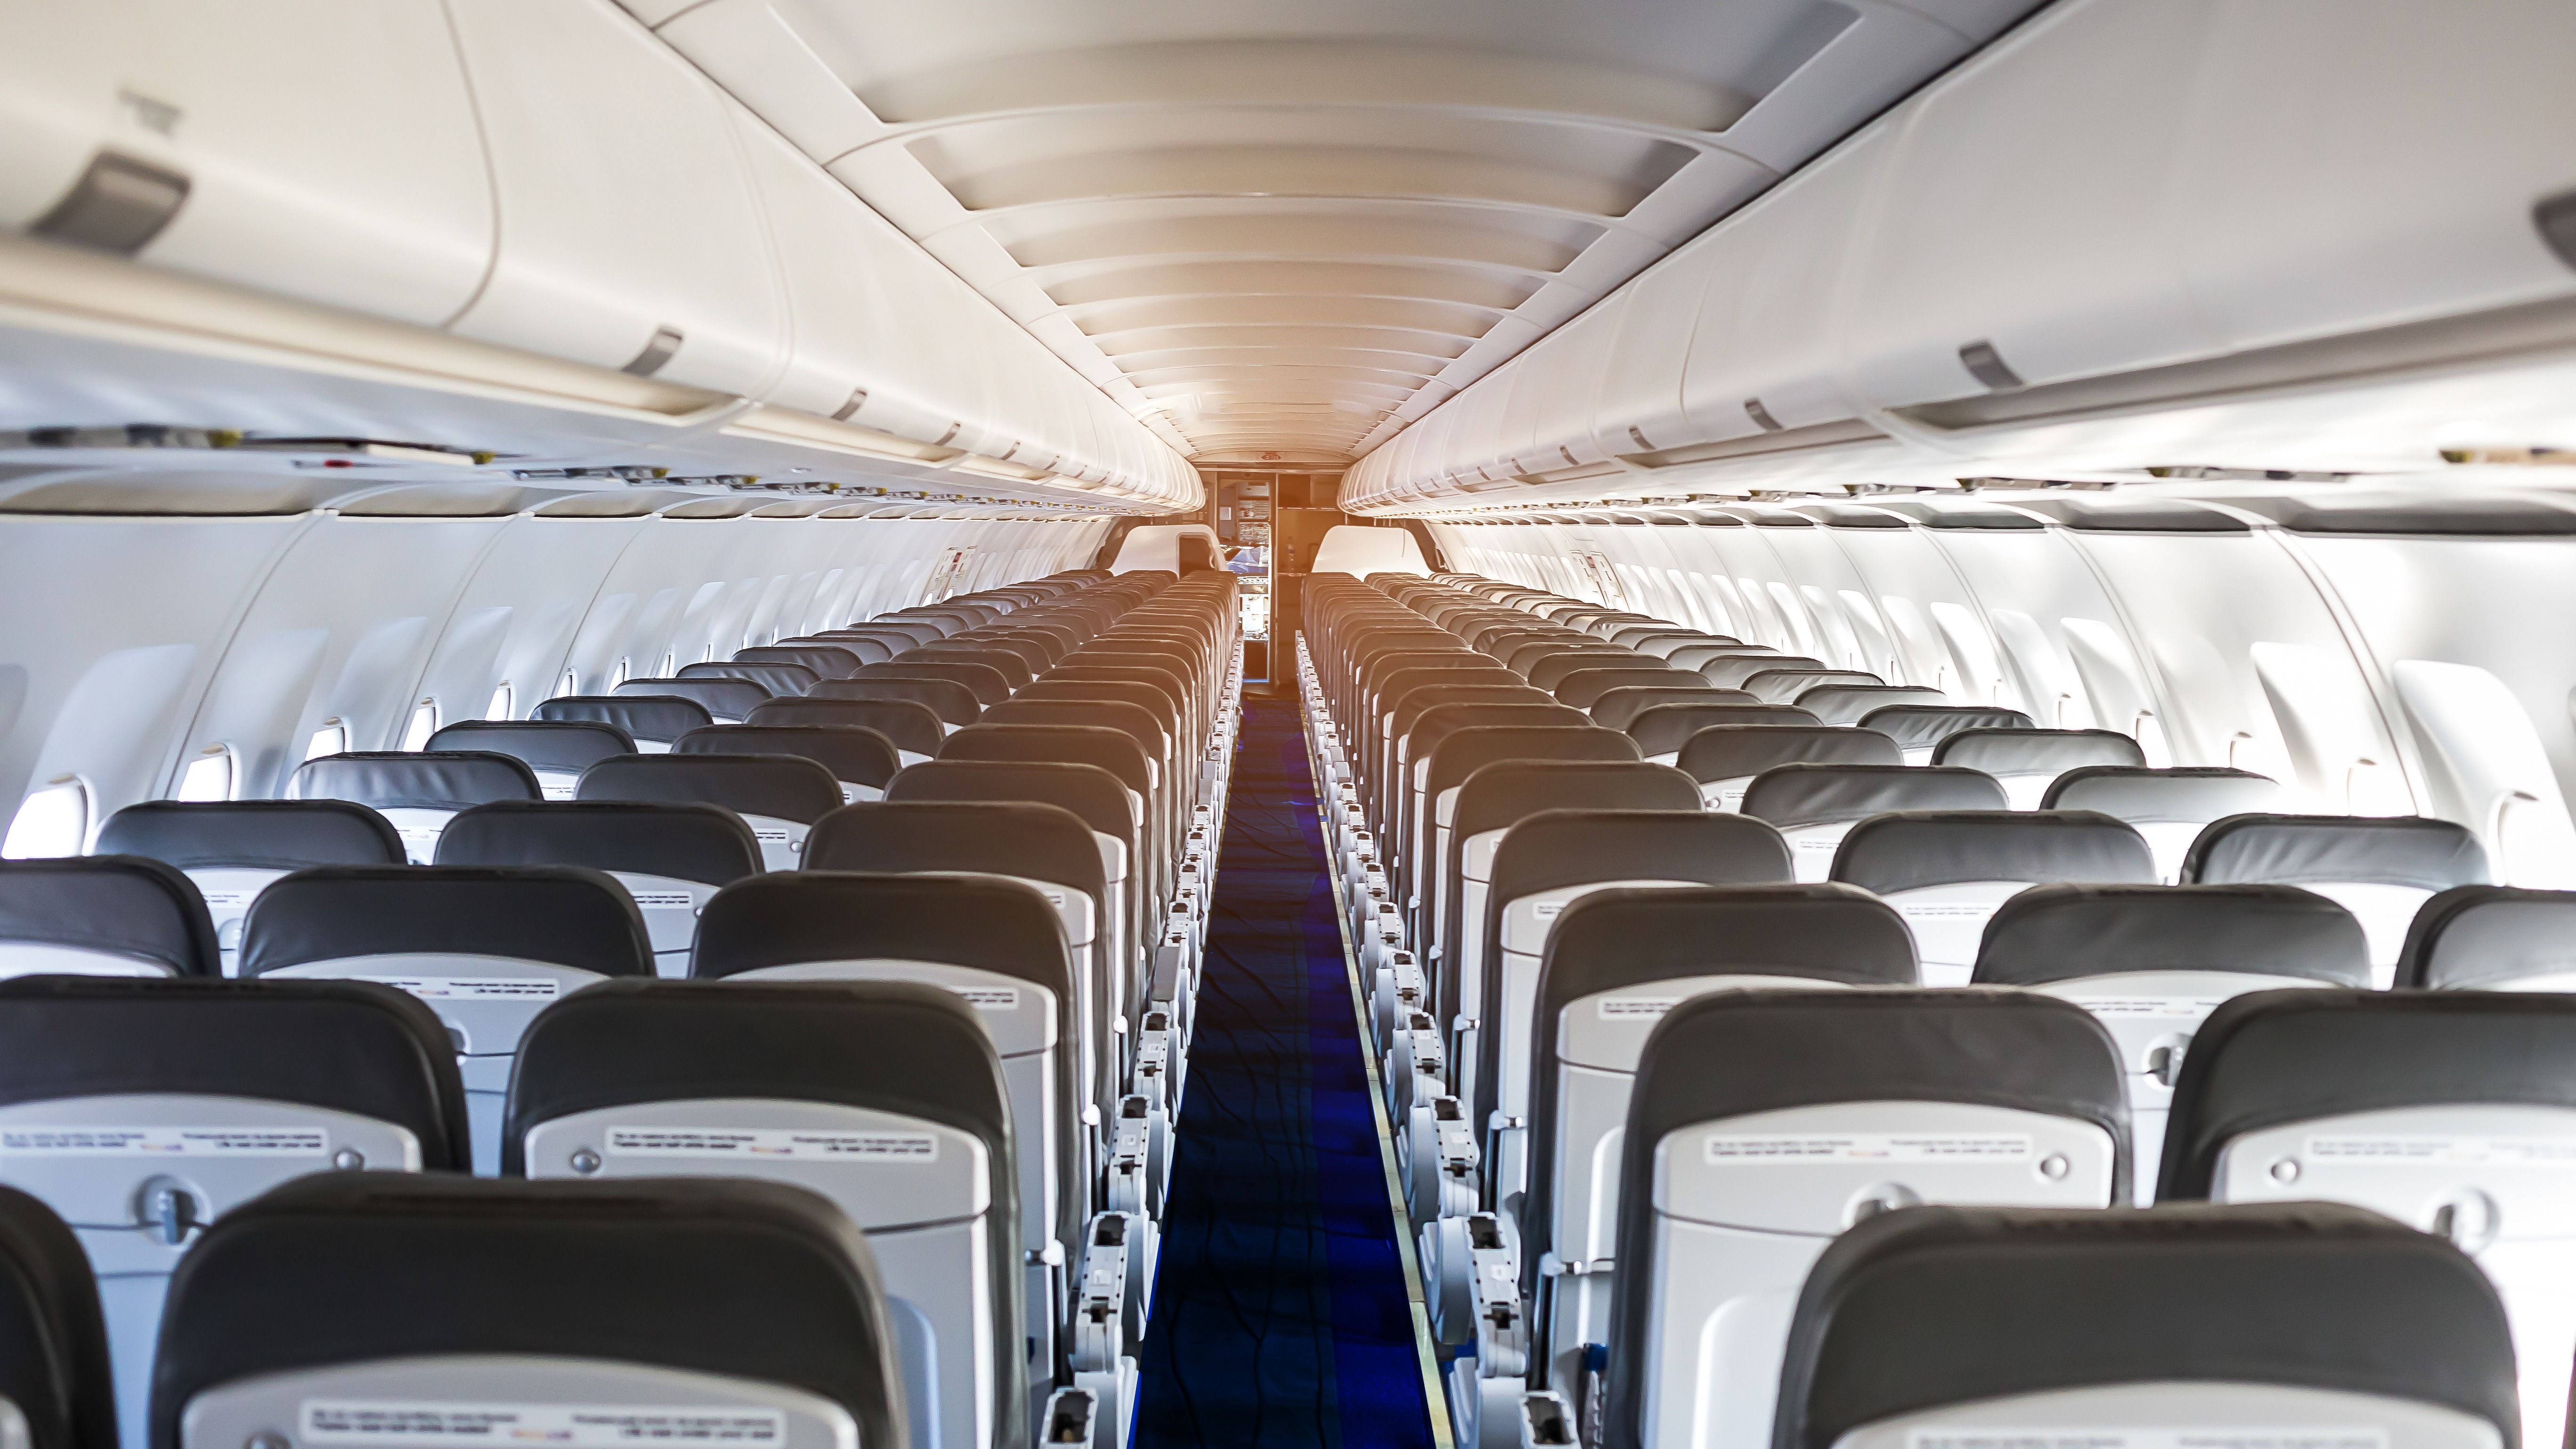 Typical single-aisle economy class cabin